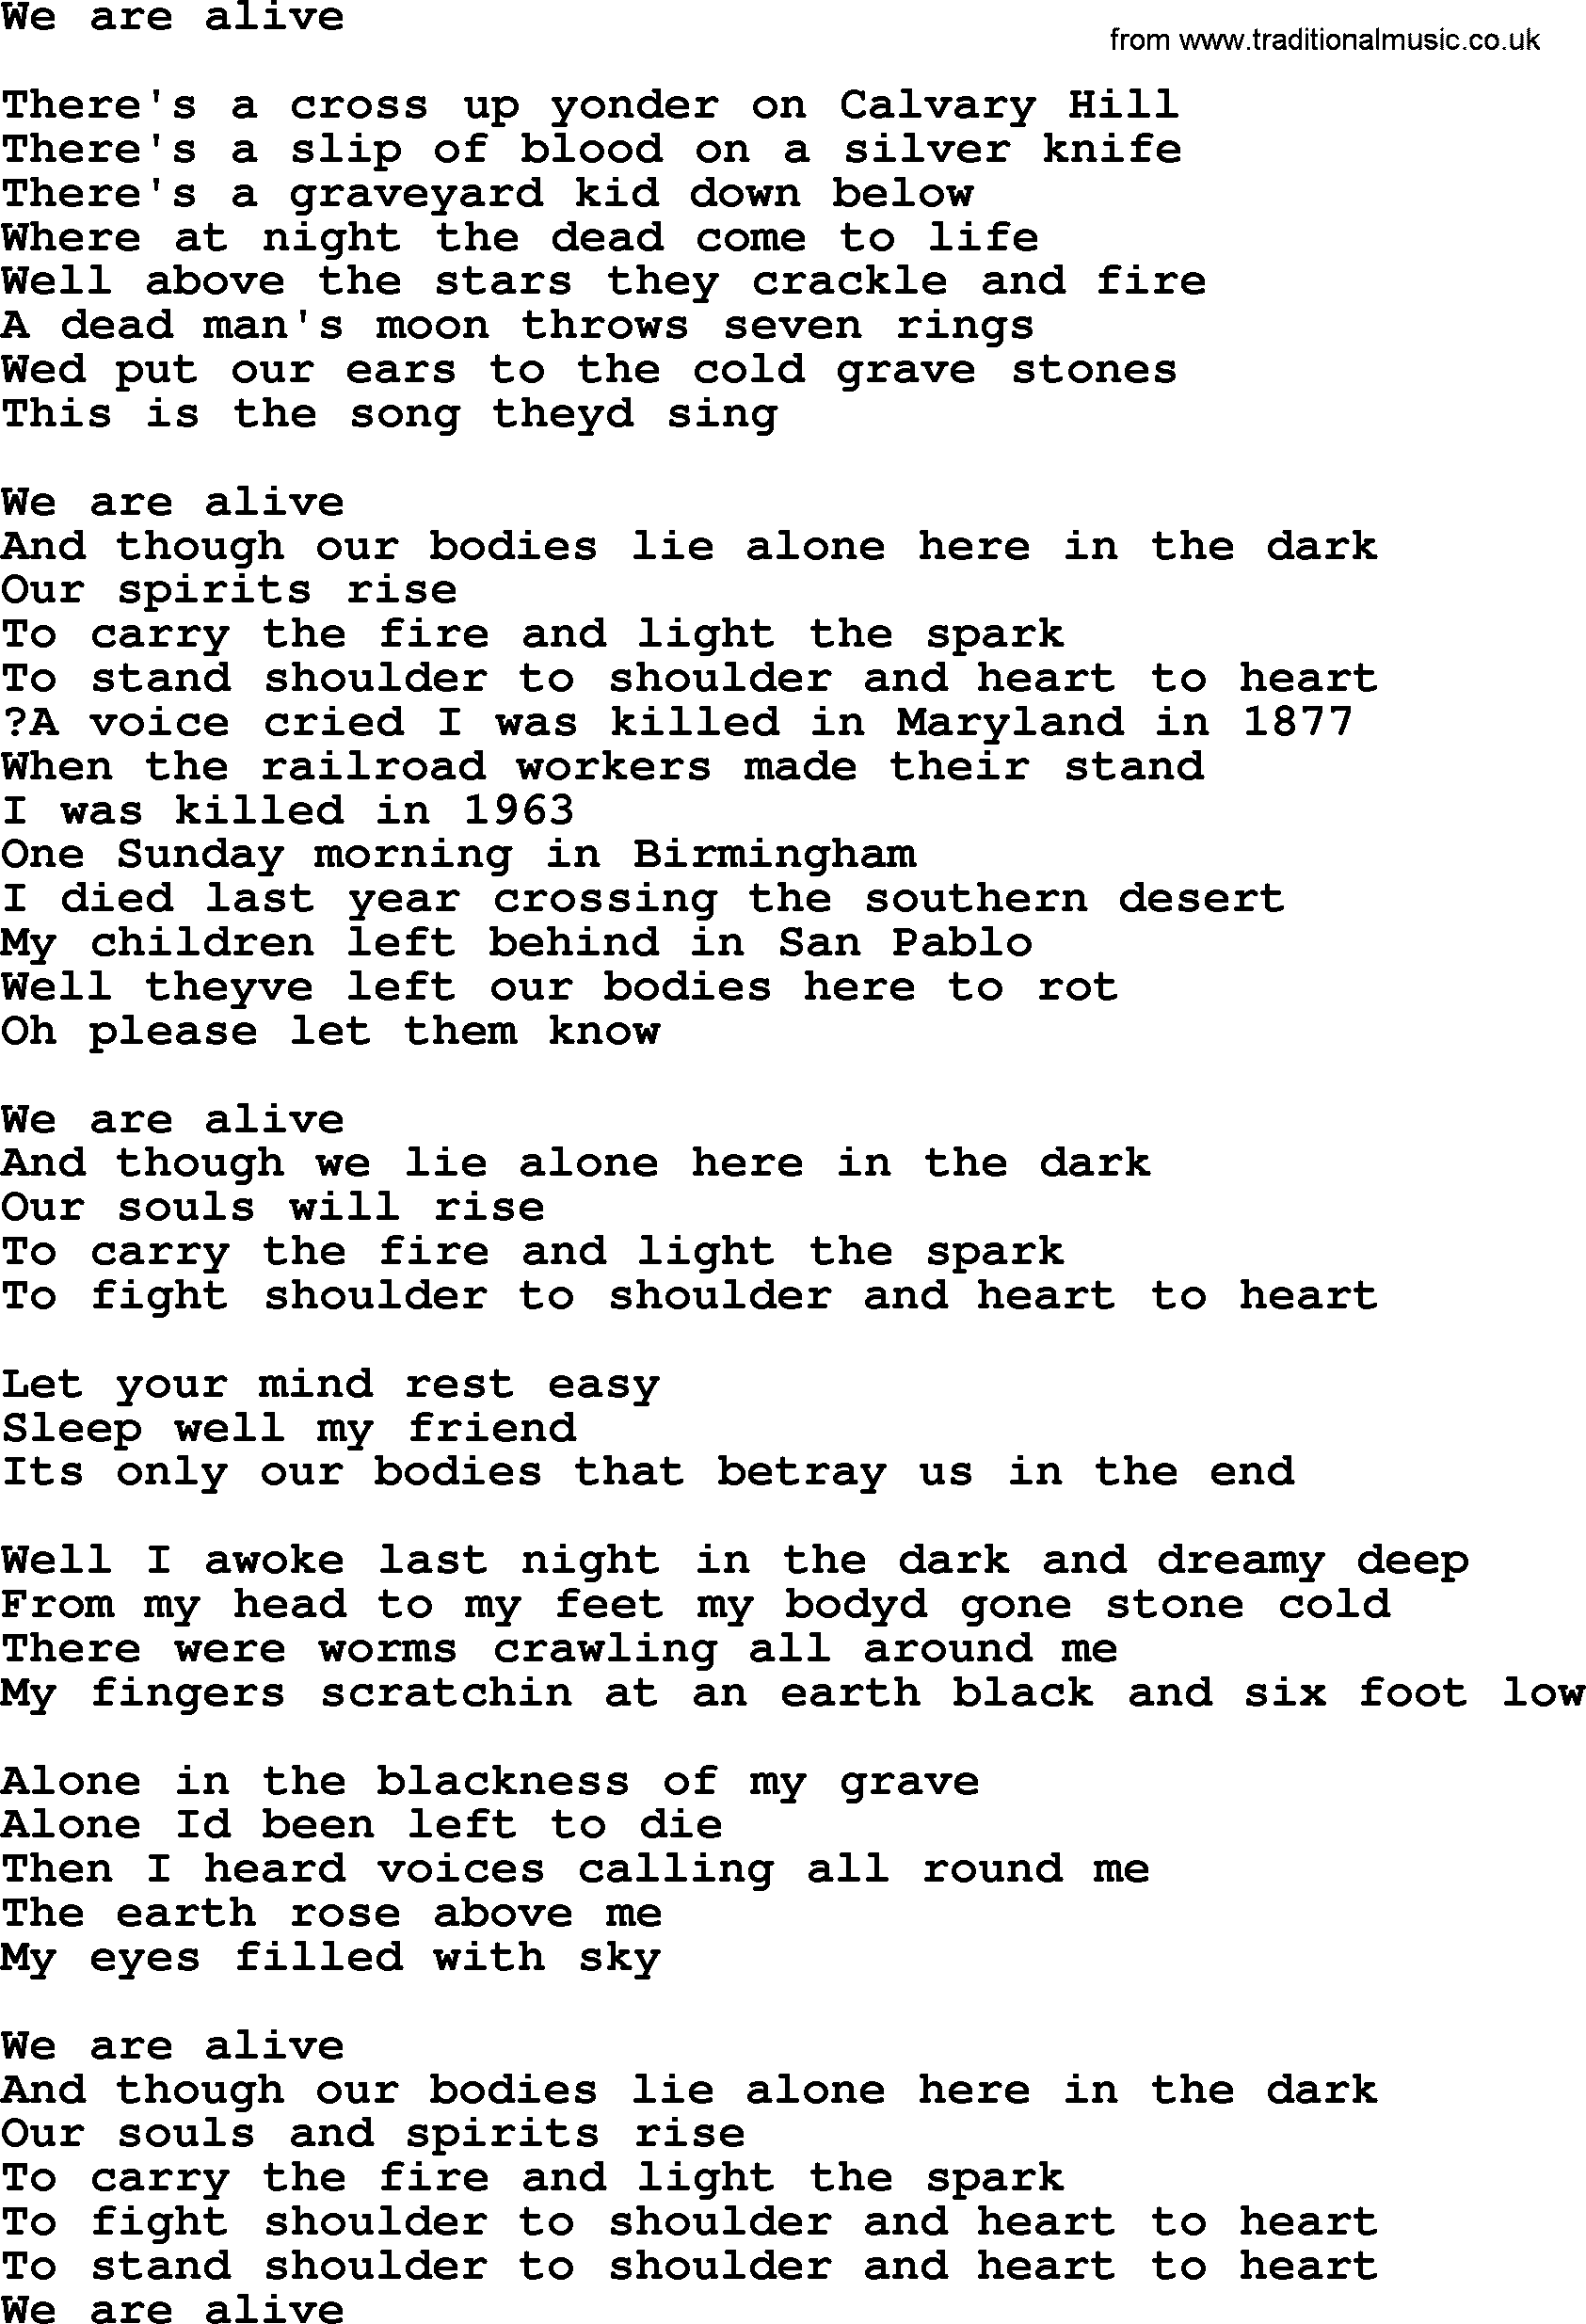 Bruce Springsteen song: We Are Alive lyrics